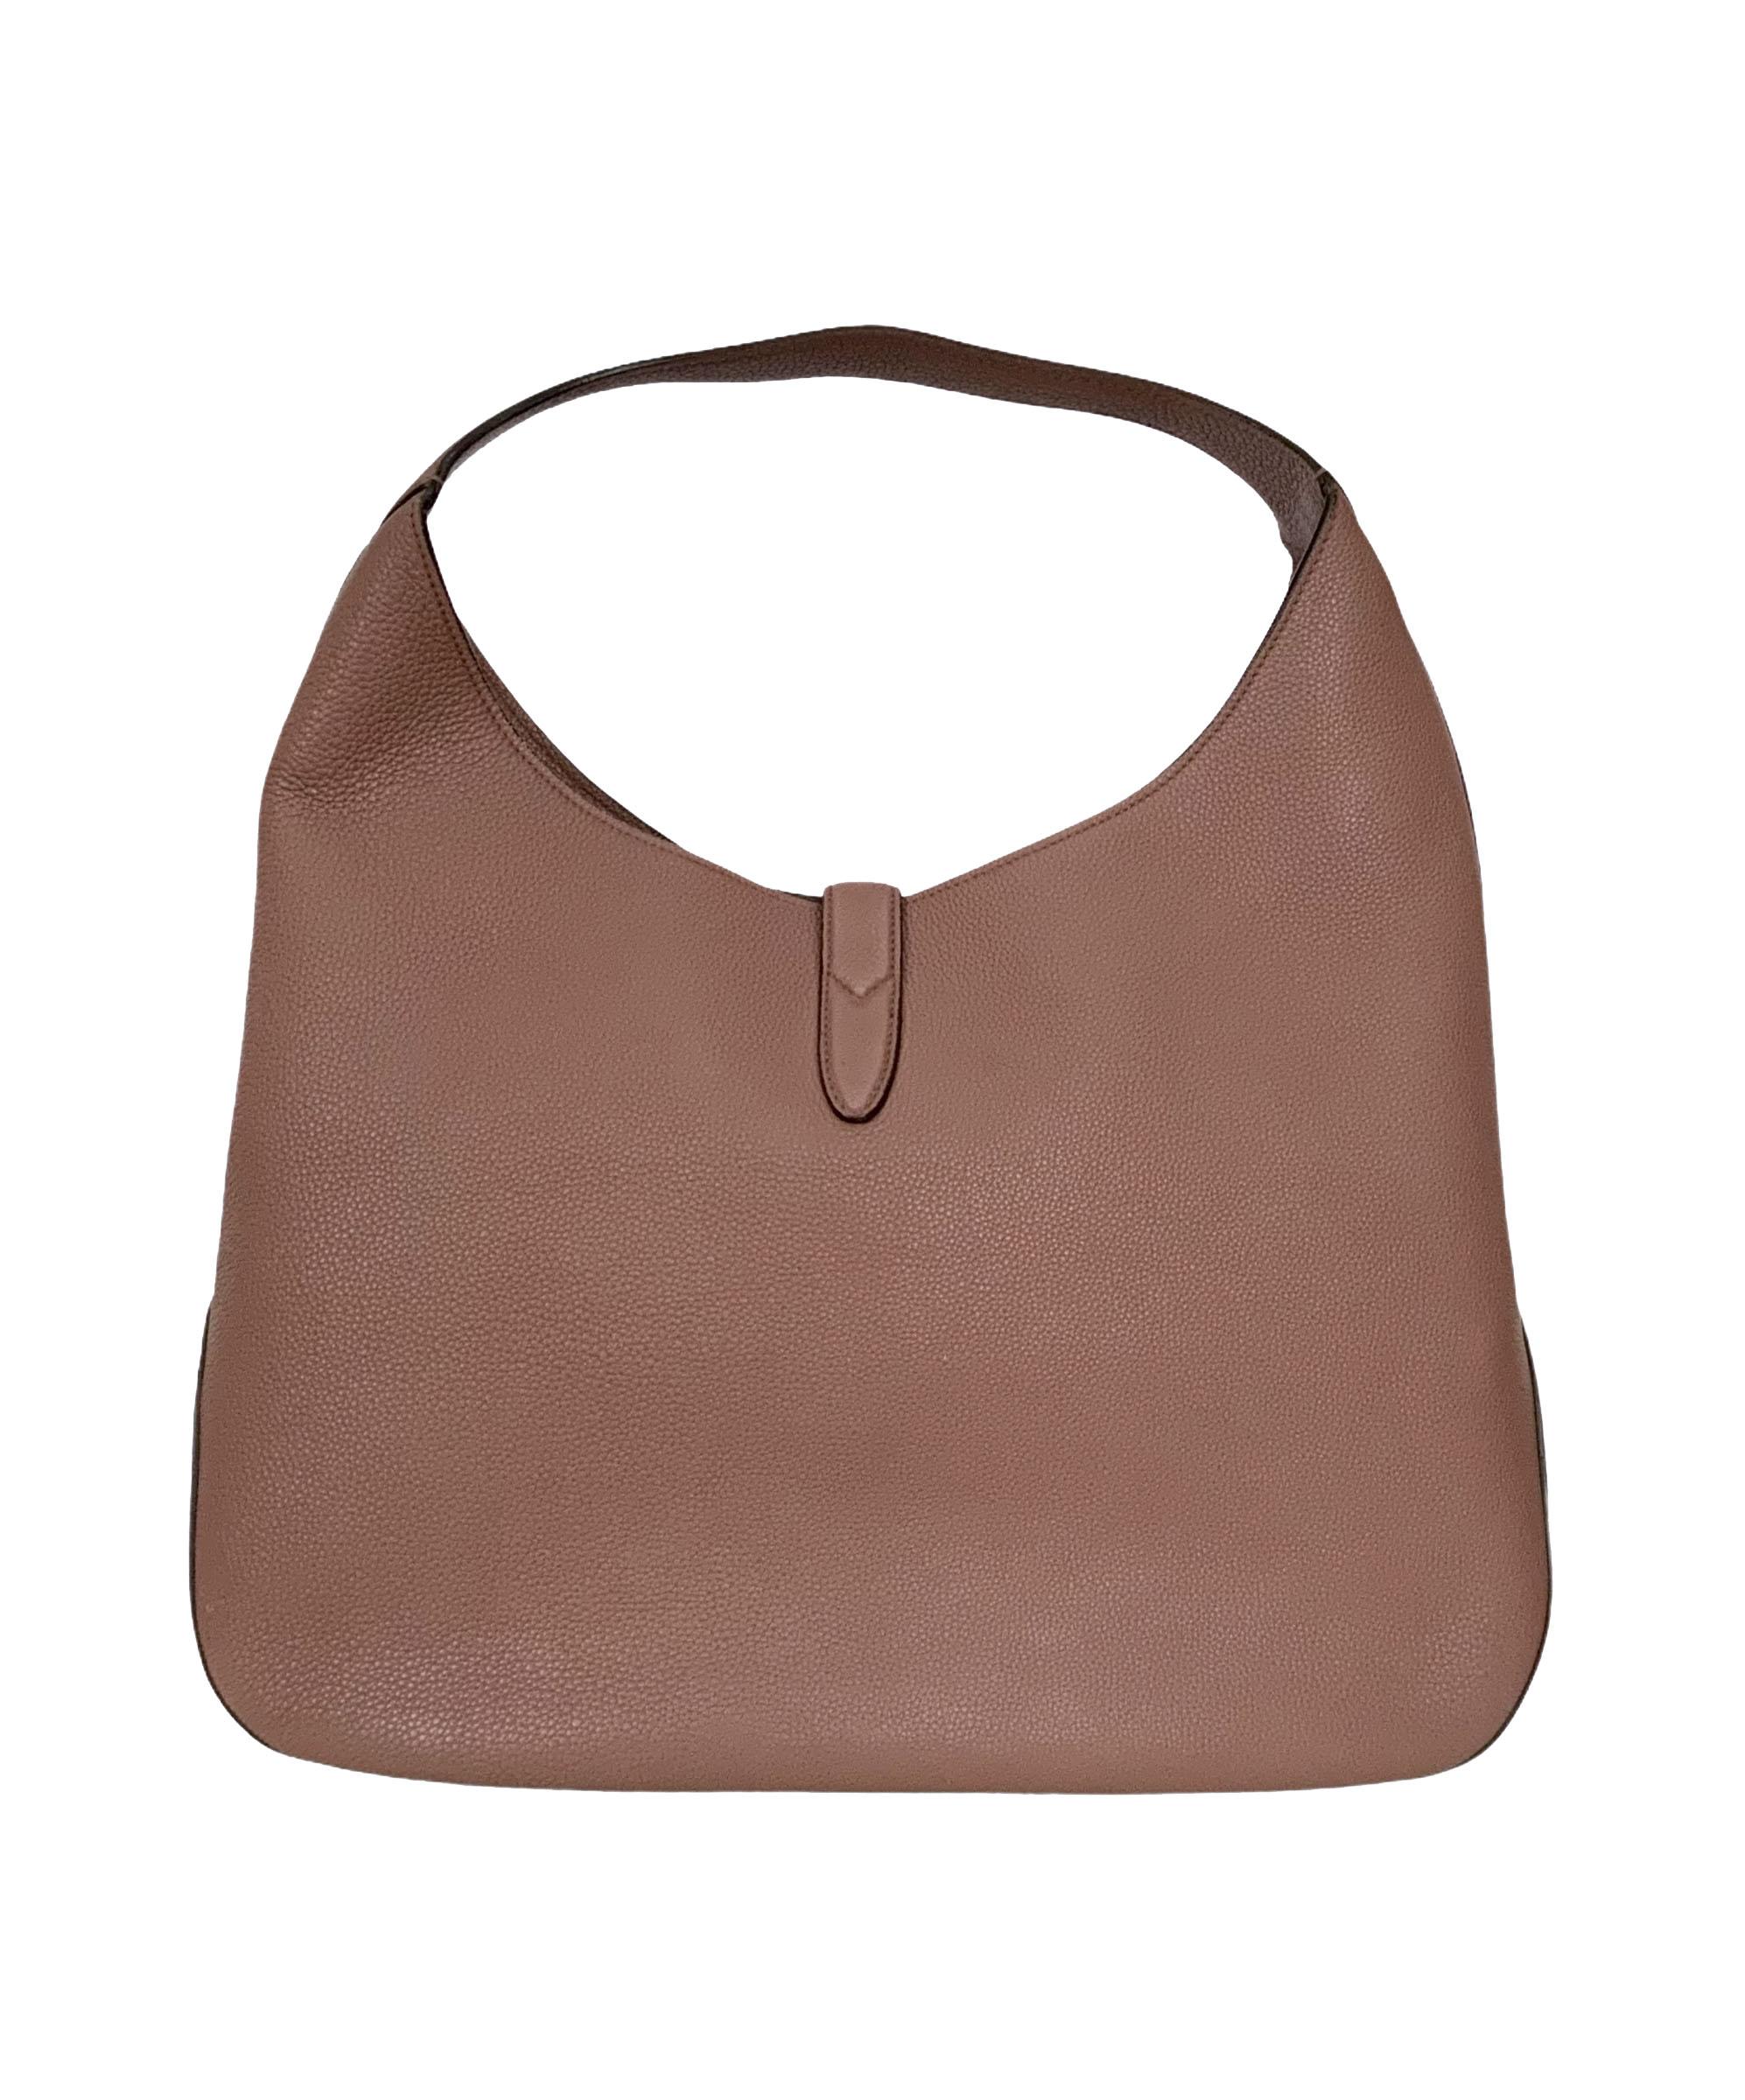 This pre-owned Jackie Soft hobo has a spacious interior with an attached zip pouch.
The edges are hand-painted and a piston strap as a closure. 
Crafted in a soft grain leather which gives the bag a beautiful structure while maintaining its slouchy